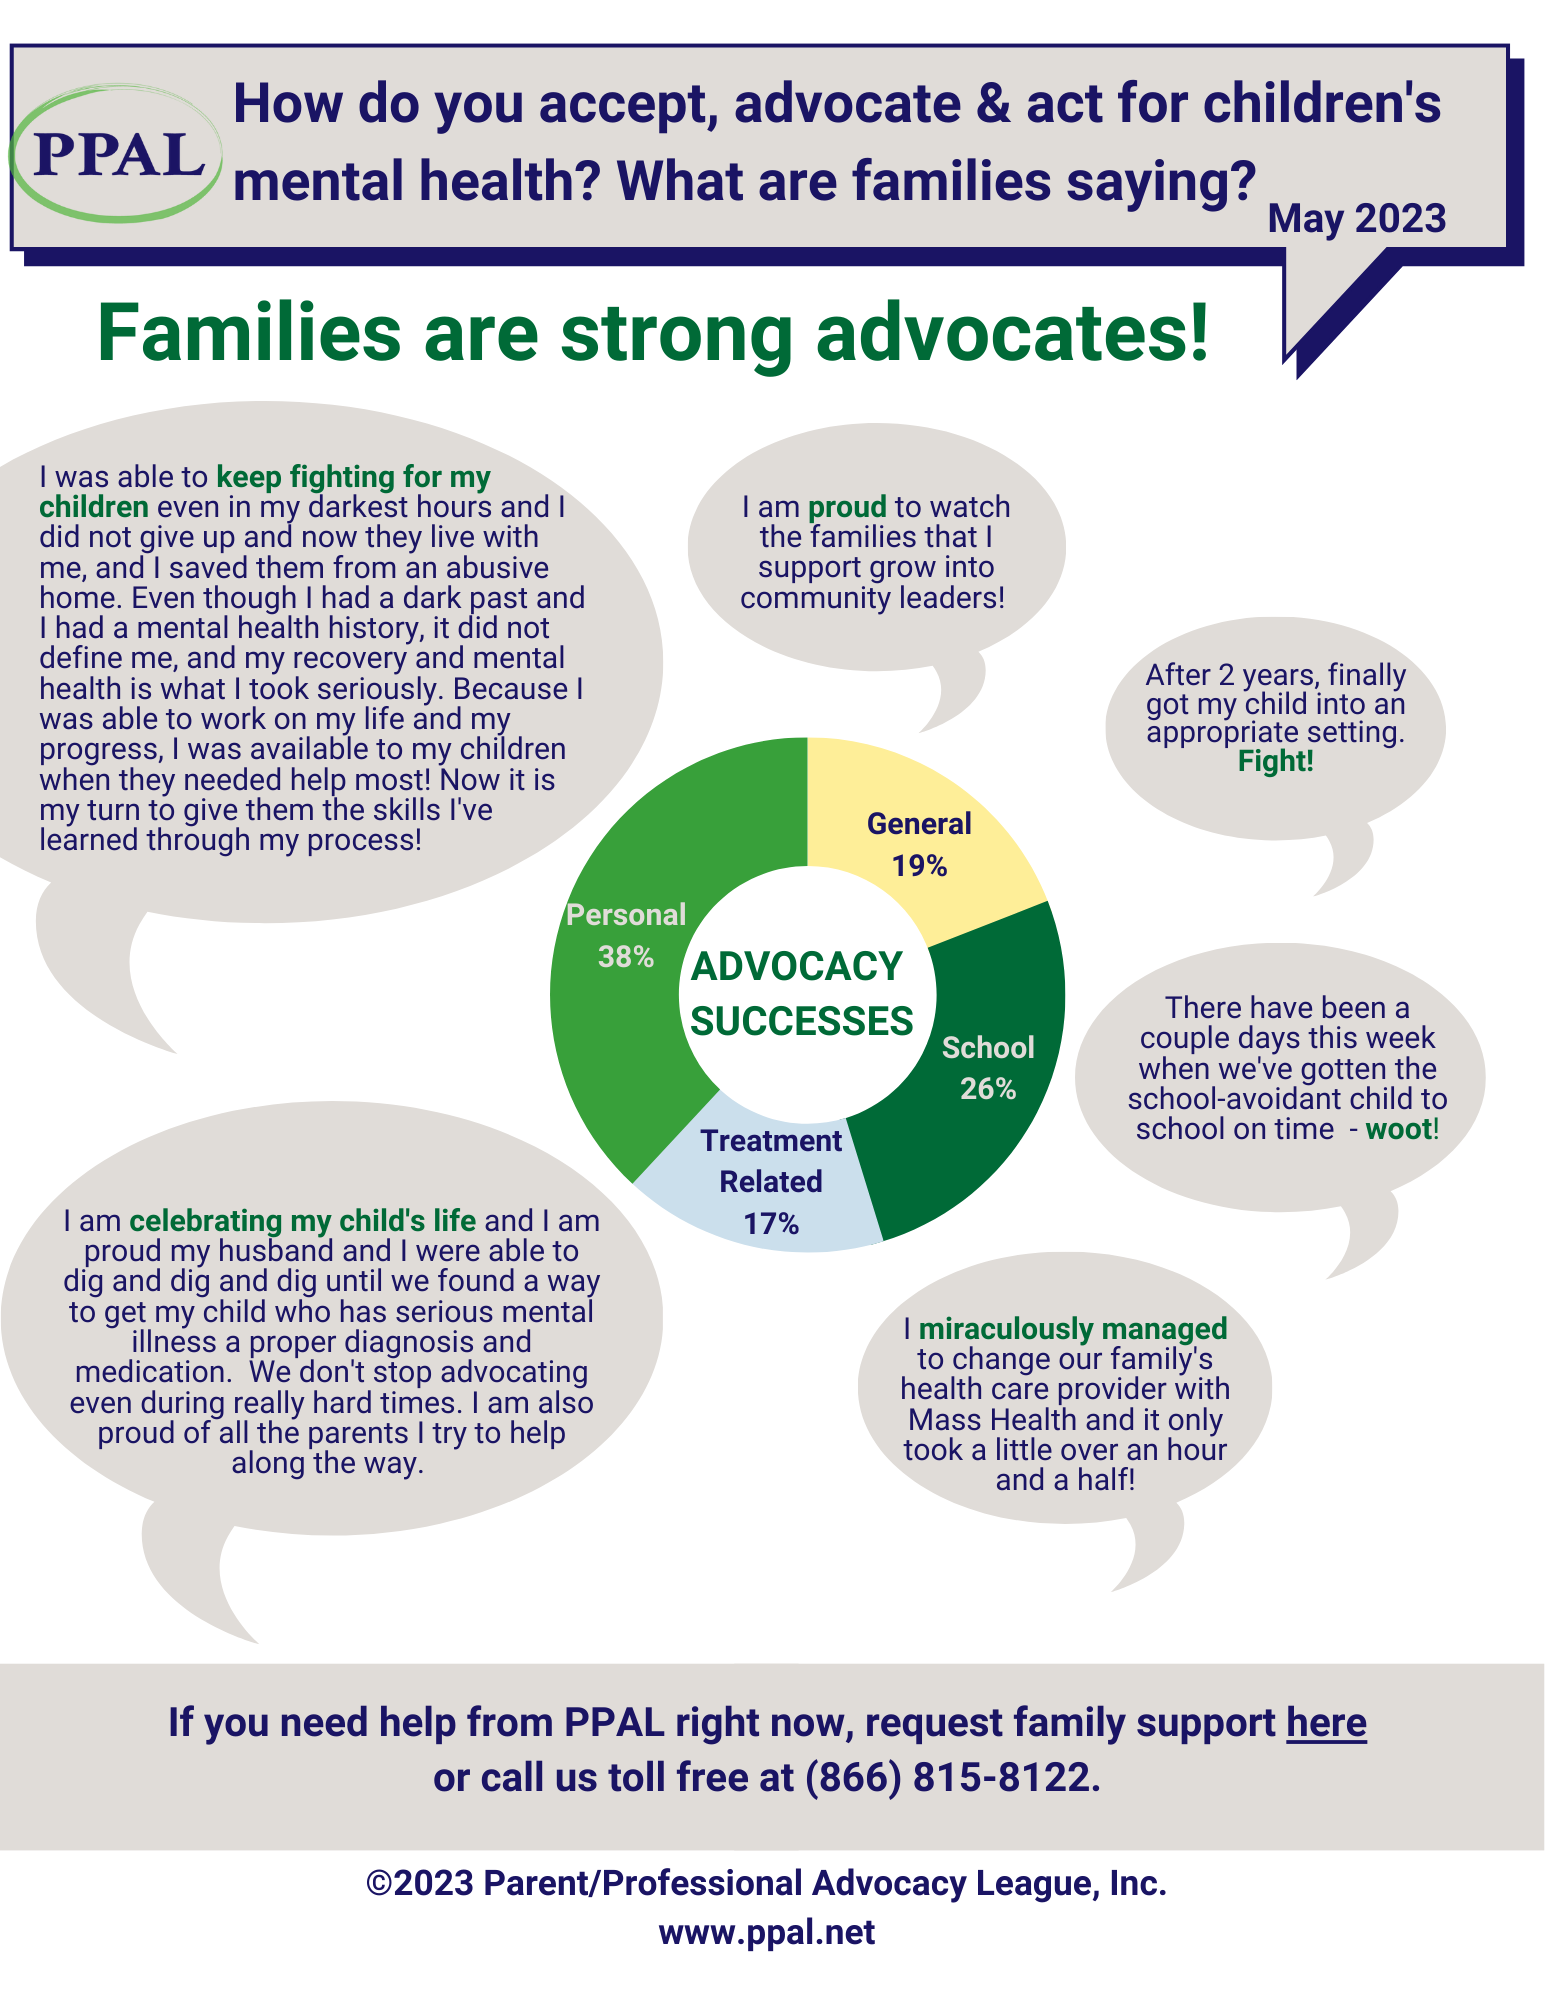 How do you accept, advocate & act for children's mental health?